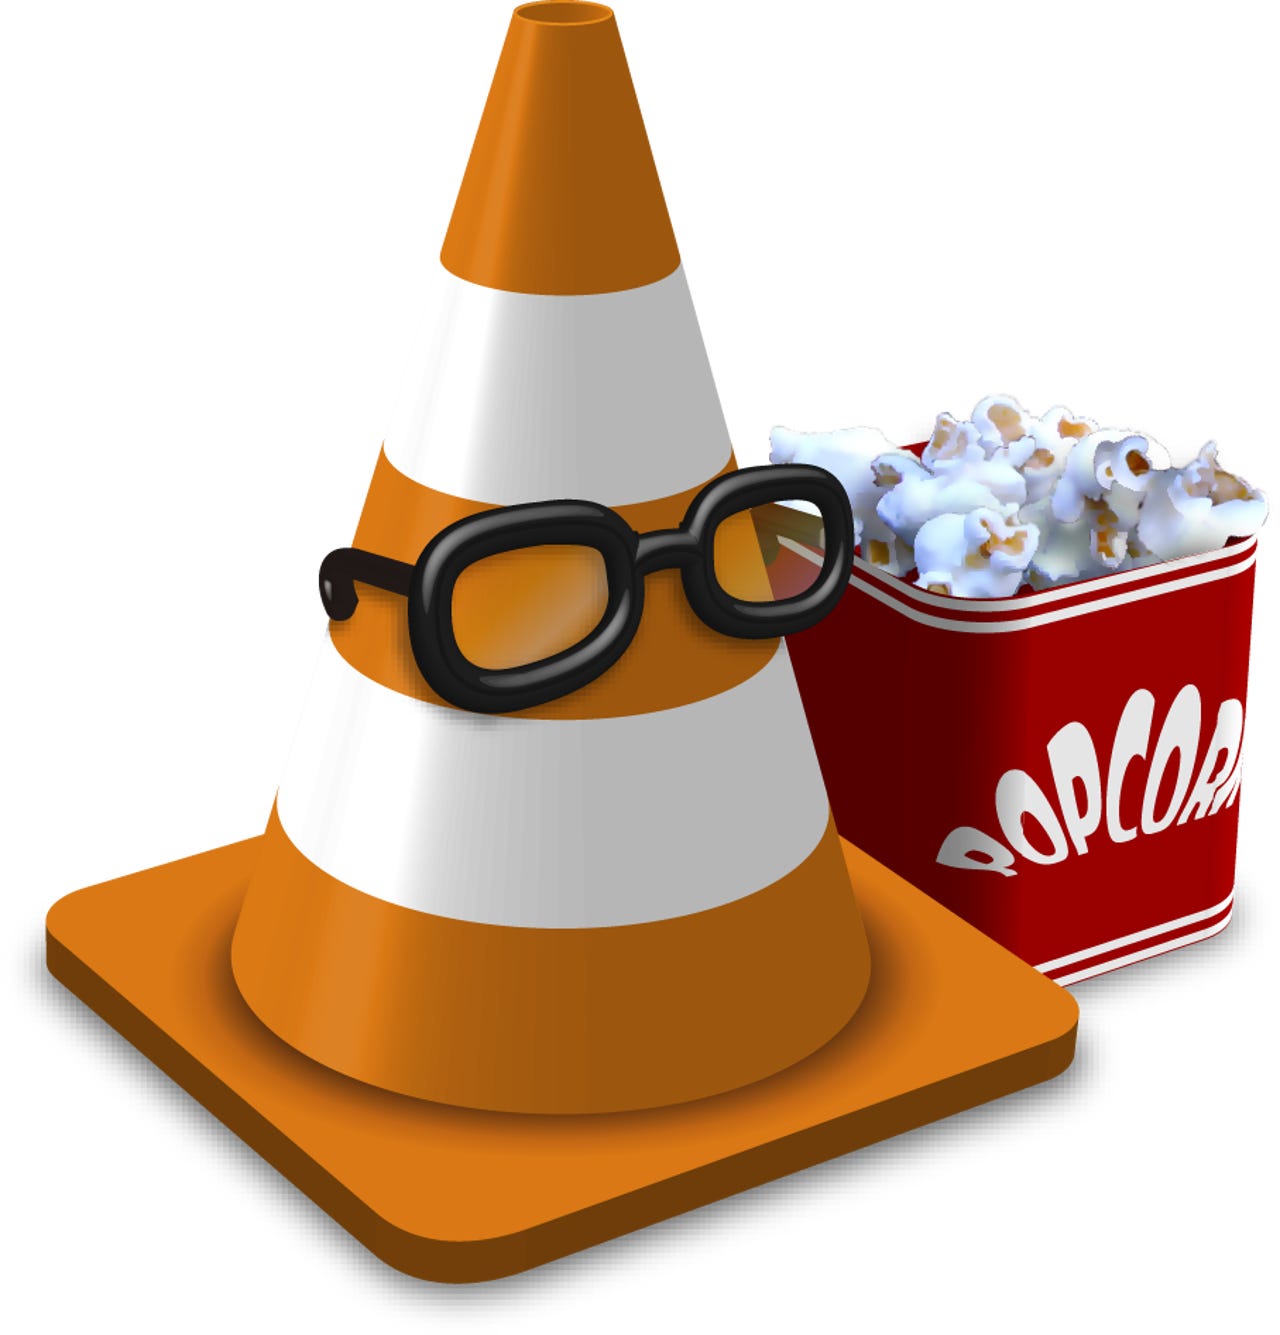 cone-video-large.png